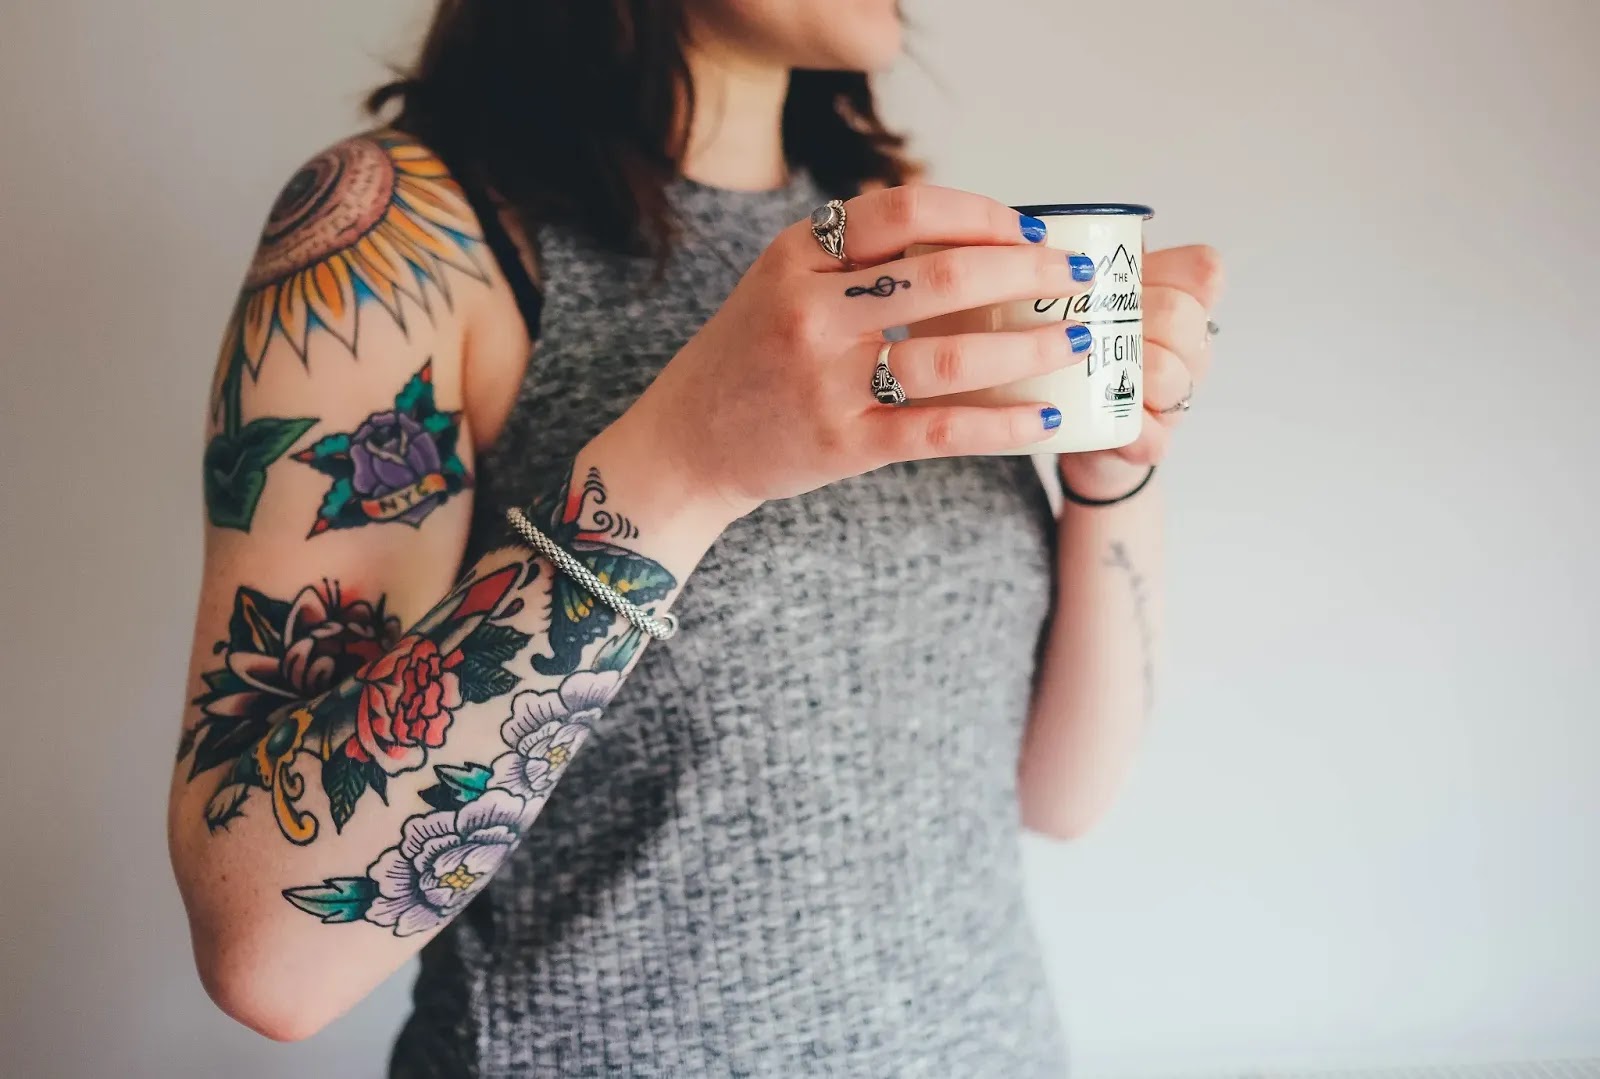 WHAT REALLY Befalls YOUR BODY WHEN YOU GET A TATTOO